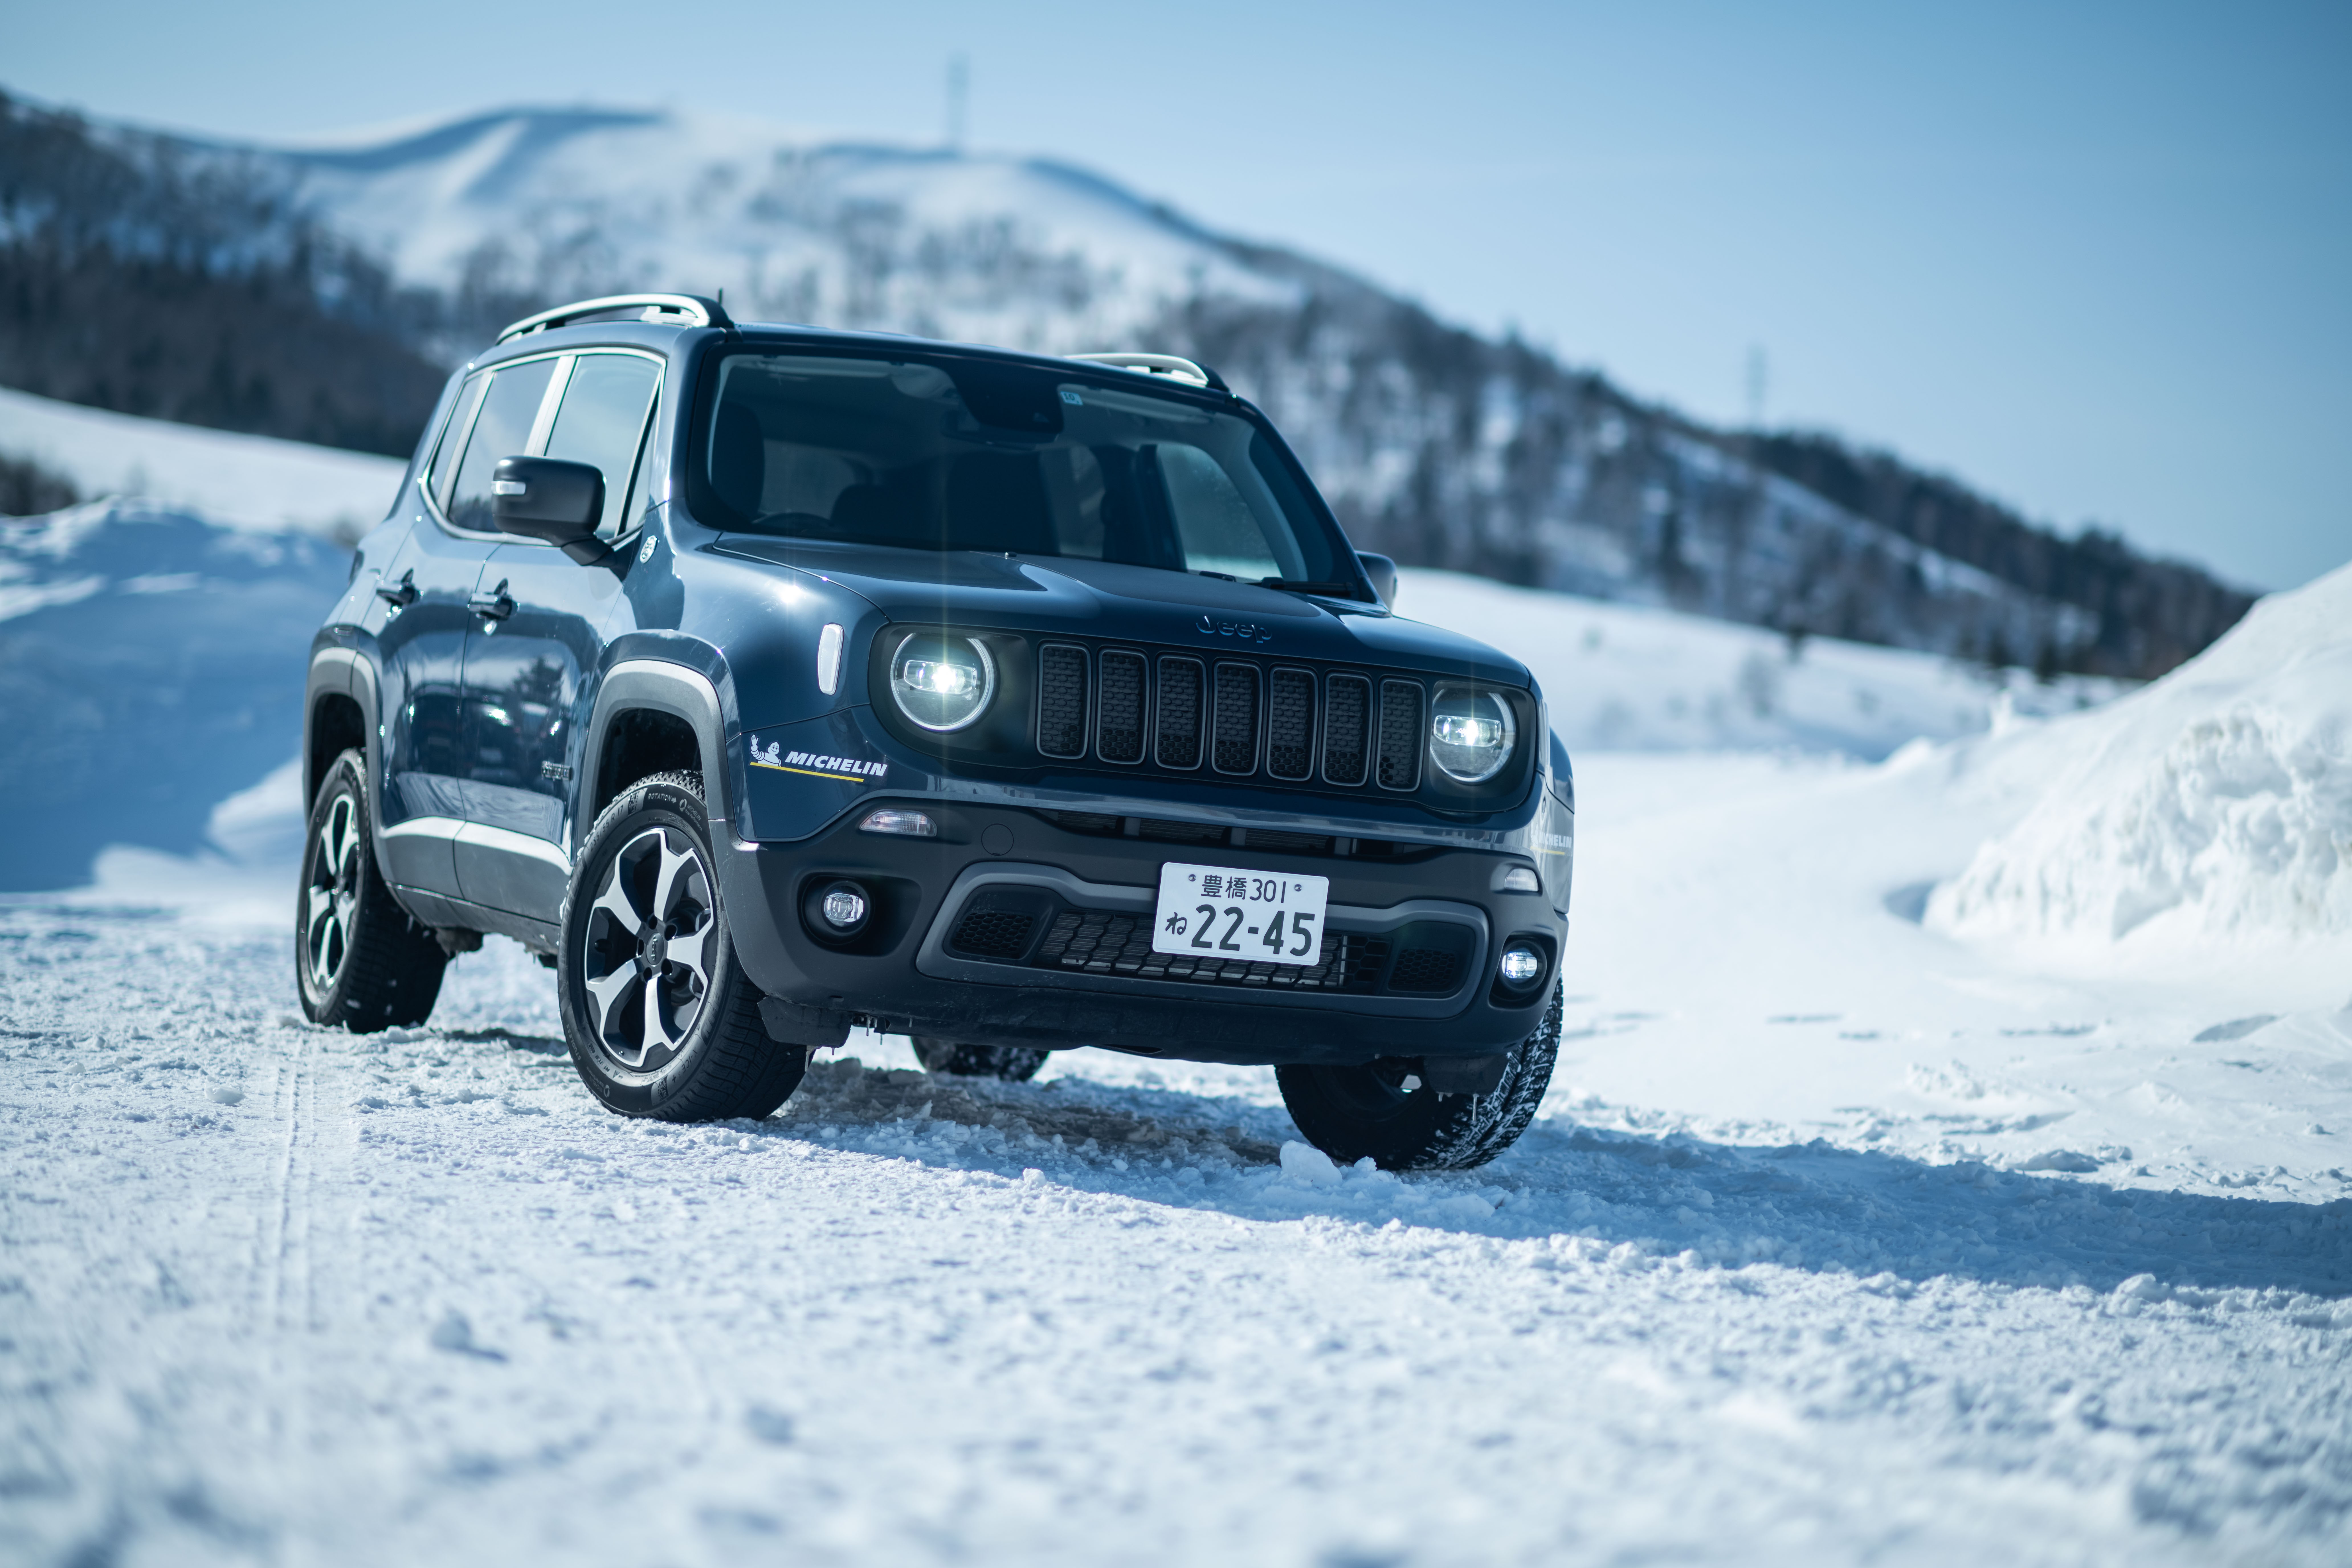 jeep renegade 4xe, vehicles, jeep renegade, electric car, suv, jeep Image for desktop